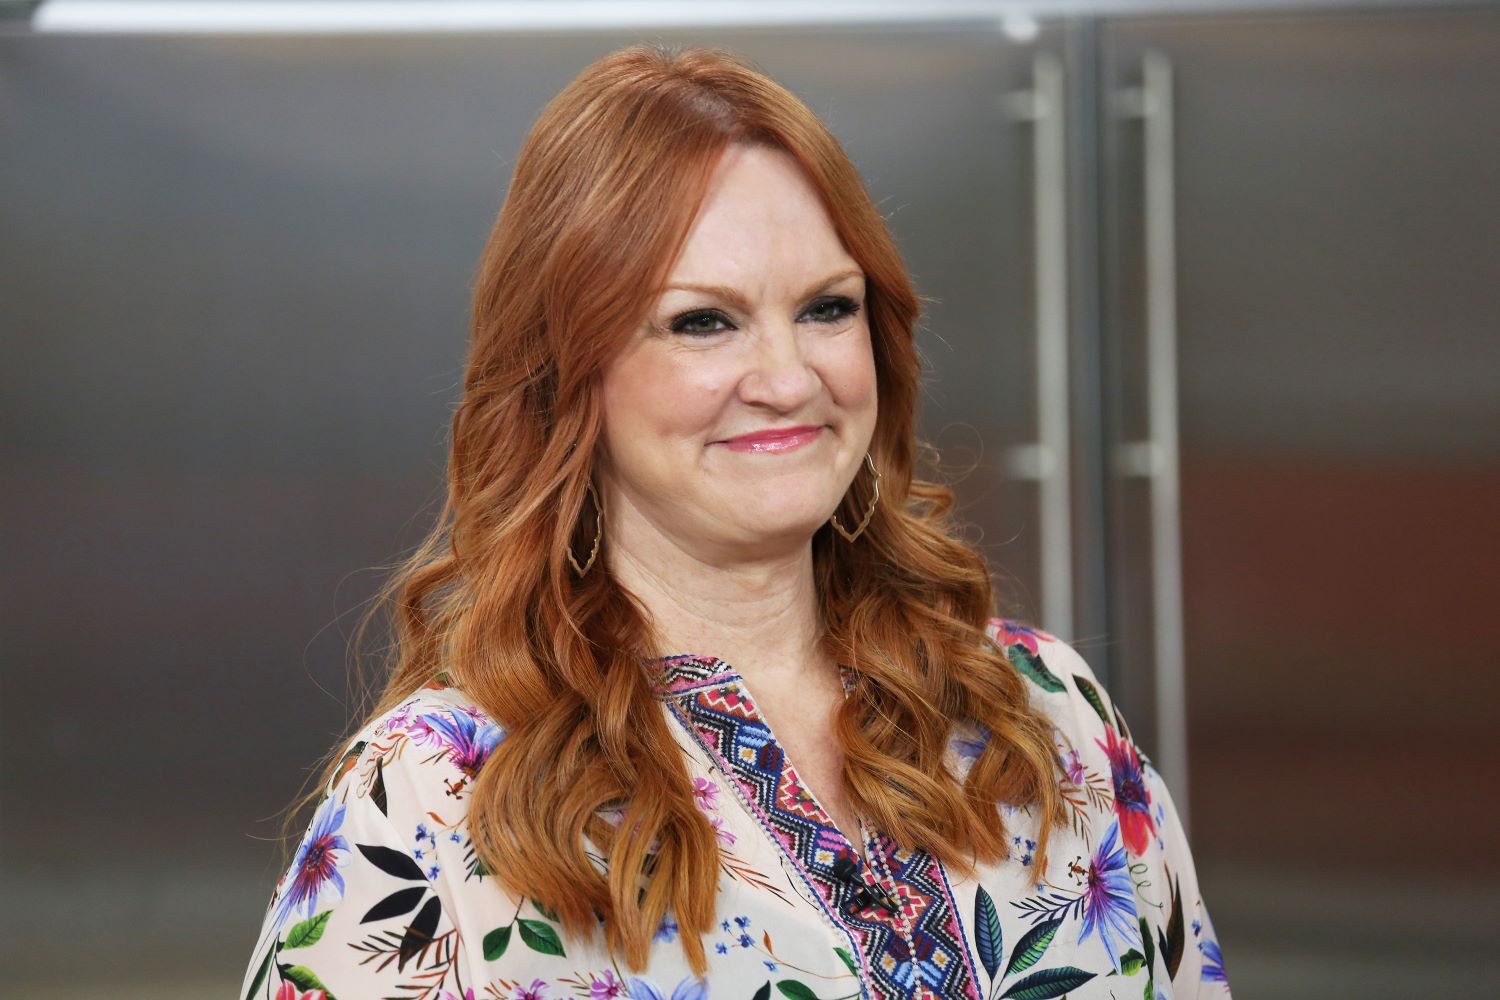 'The Pioneer Woman' Ree Drummond on Tuesday October 22, 2019